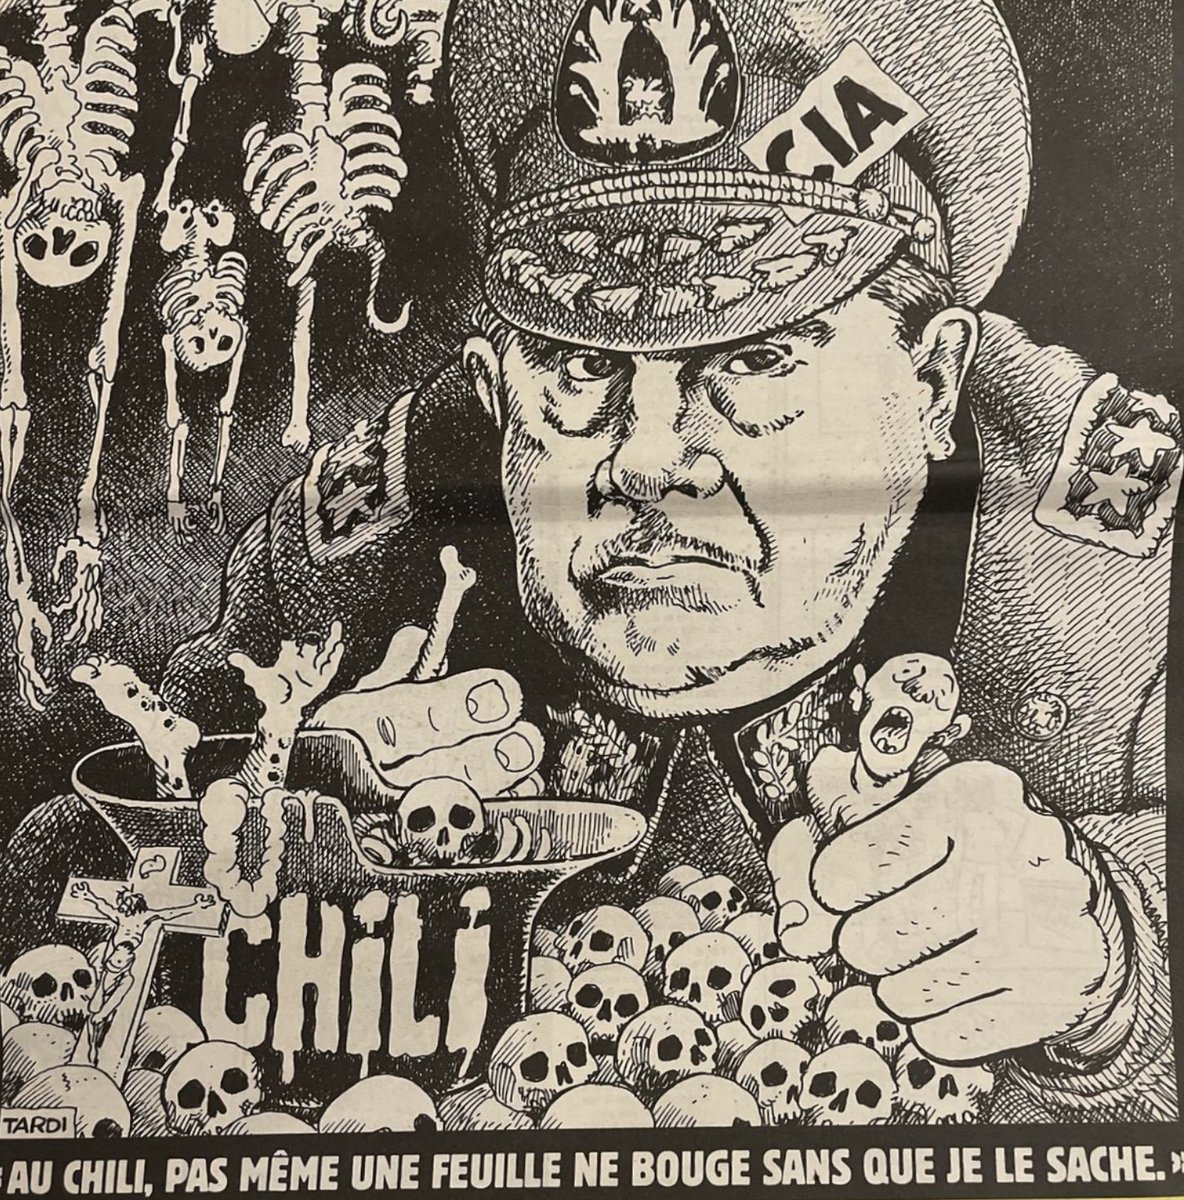 French illustration of Augusto Pinochet published on the cover of Charlie Hebdo, 2 December 1998. The caption reads: 'In Chile, not even a leaf moves without me knowing'. Artist: Jacques Tardi.